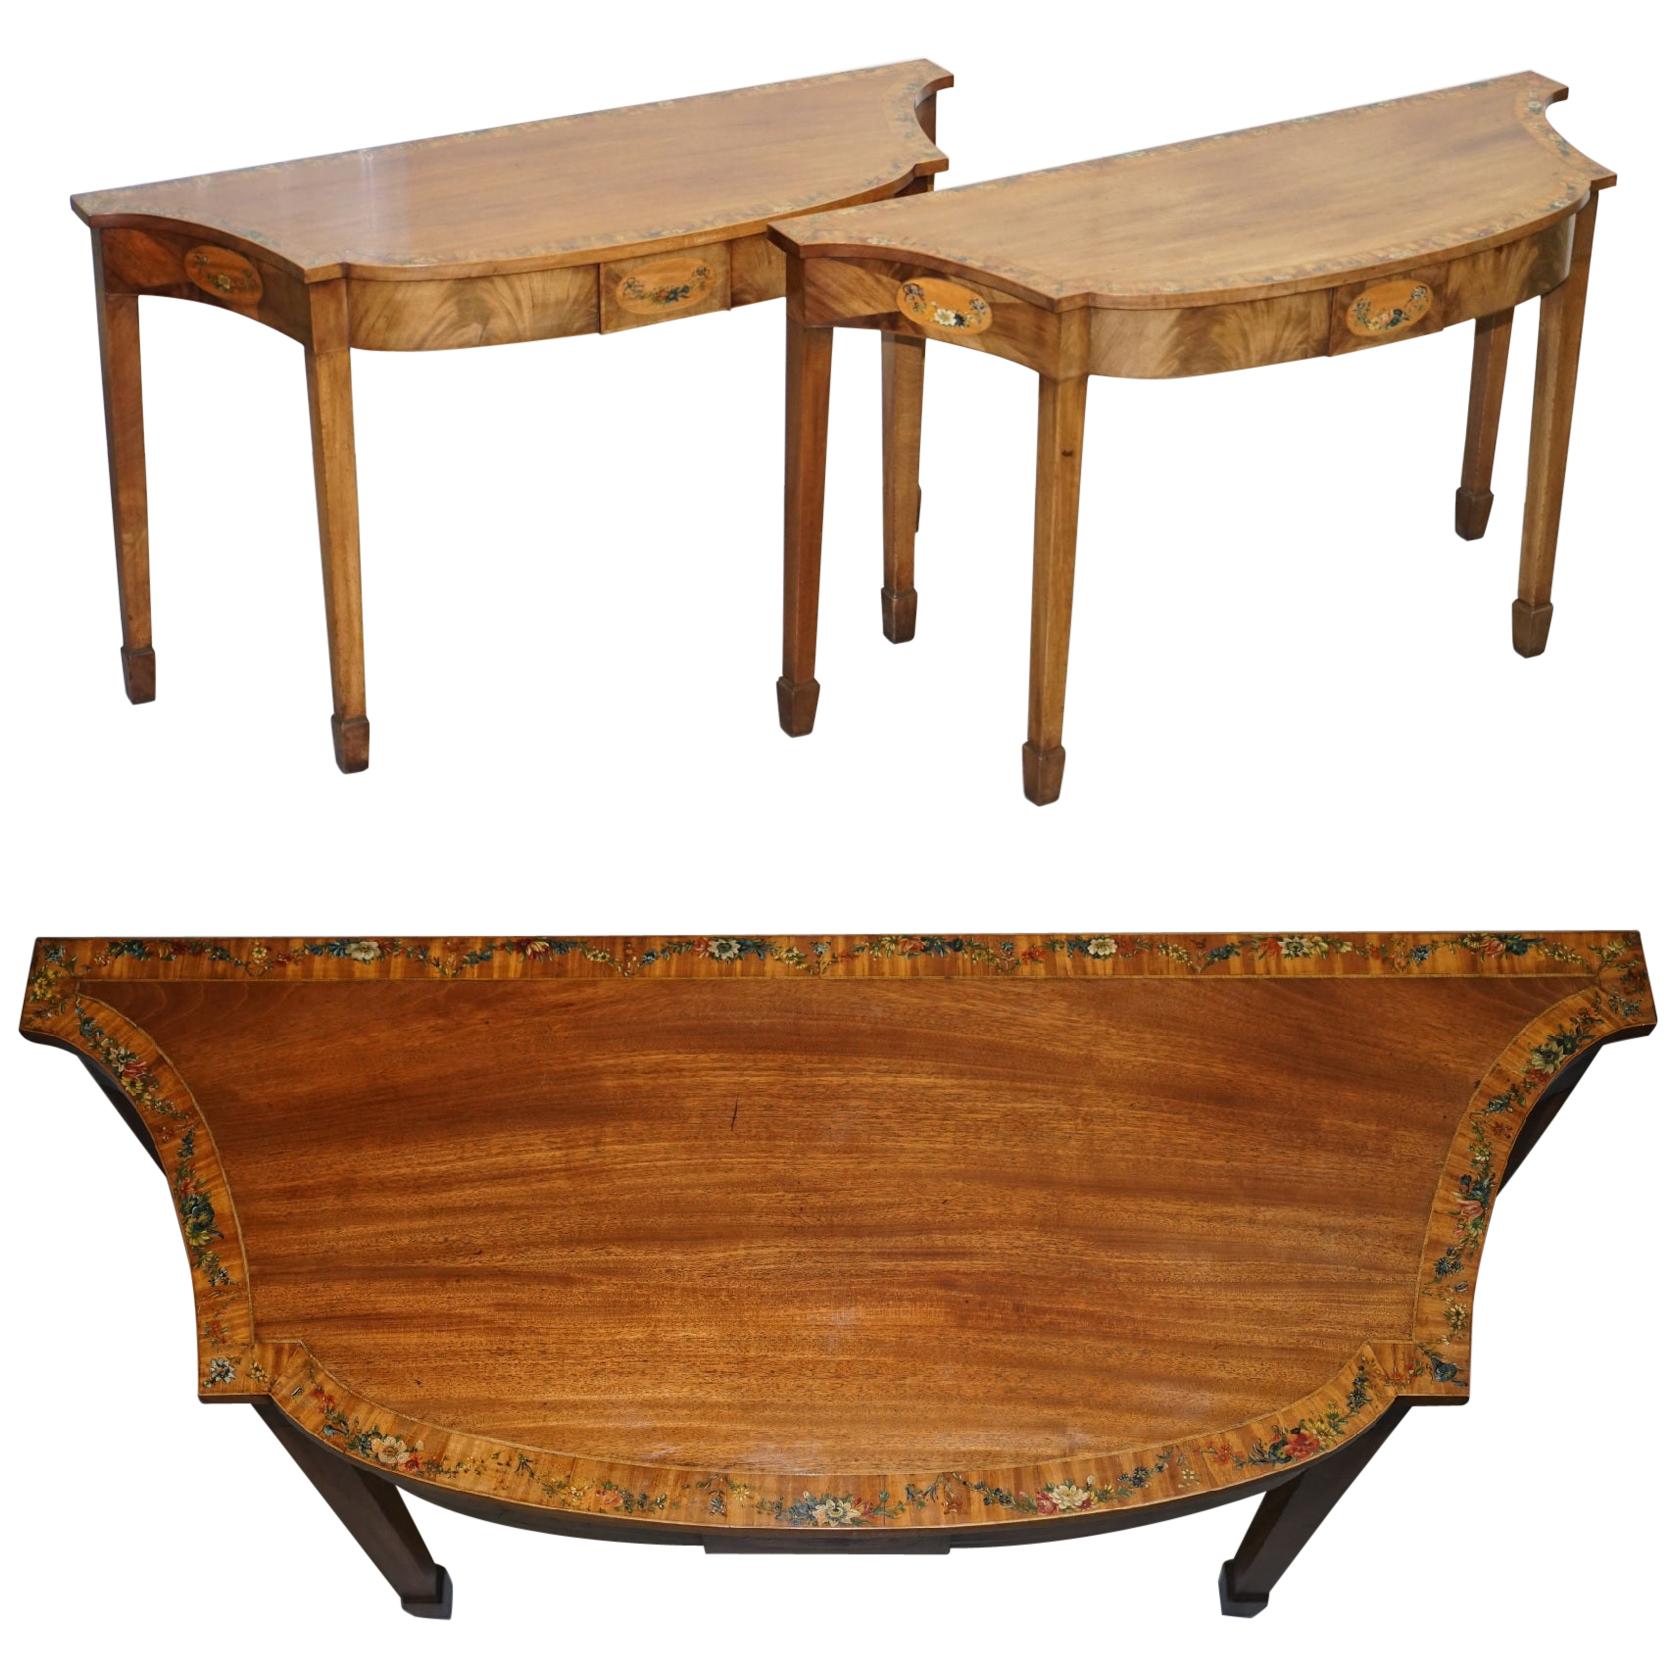 Pair of George III 1780 Satinwood & Tulip Wood Polychrome Painted Console Tables For Sale